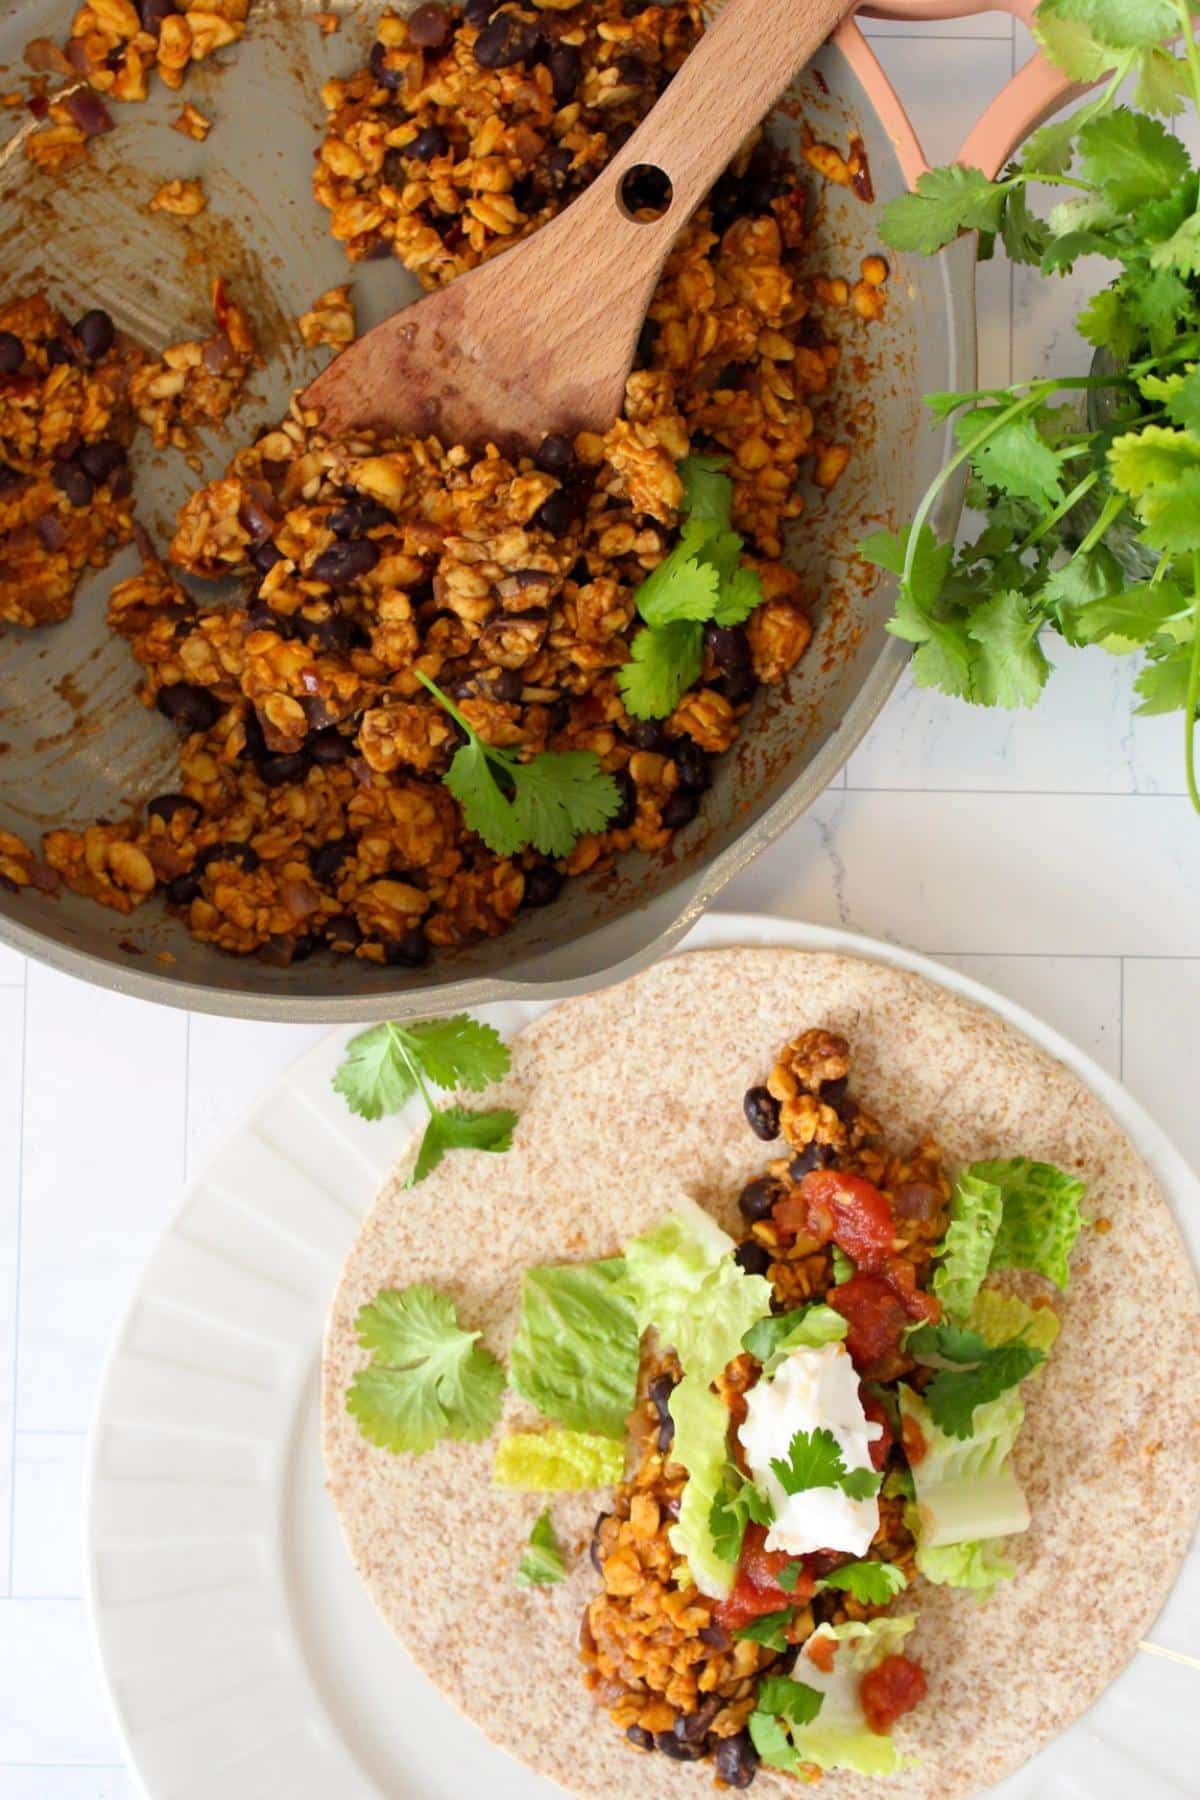 Overhead view of tempeh tacos on a plate next to a pan filled with tempeh taco stuffing.